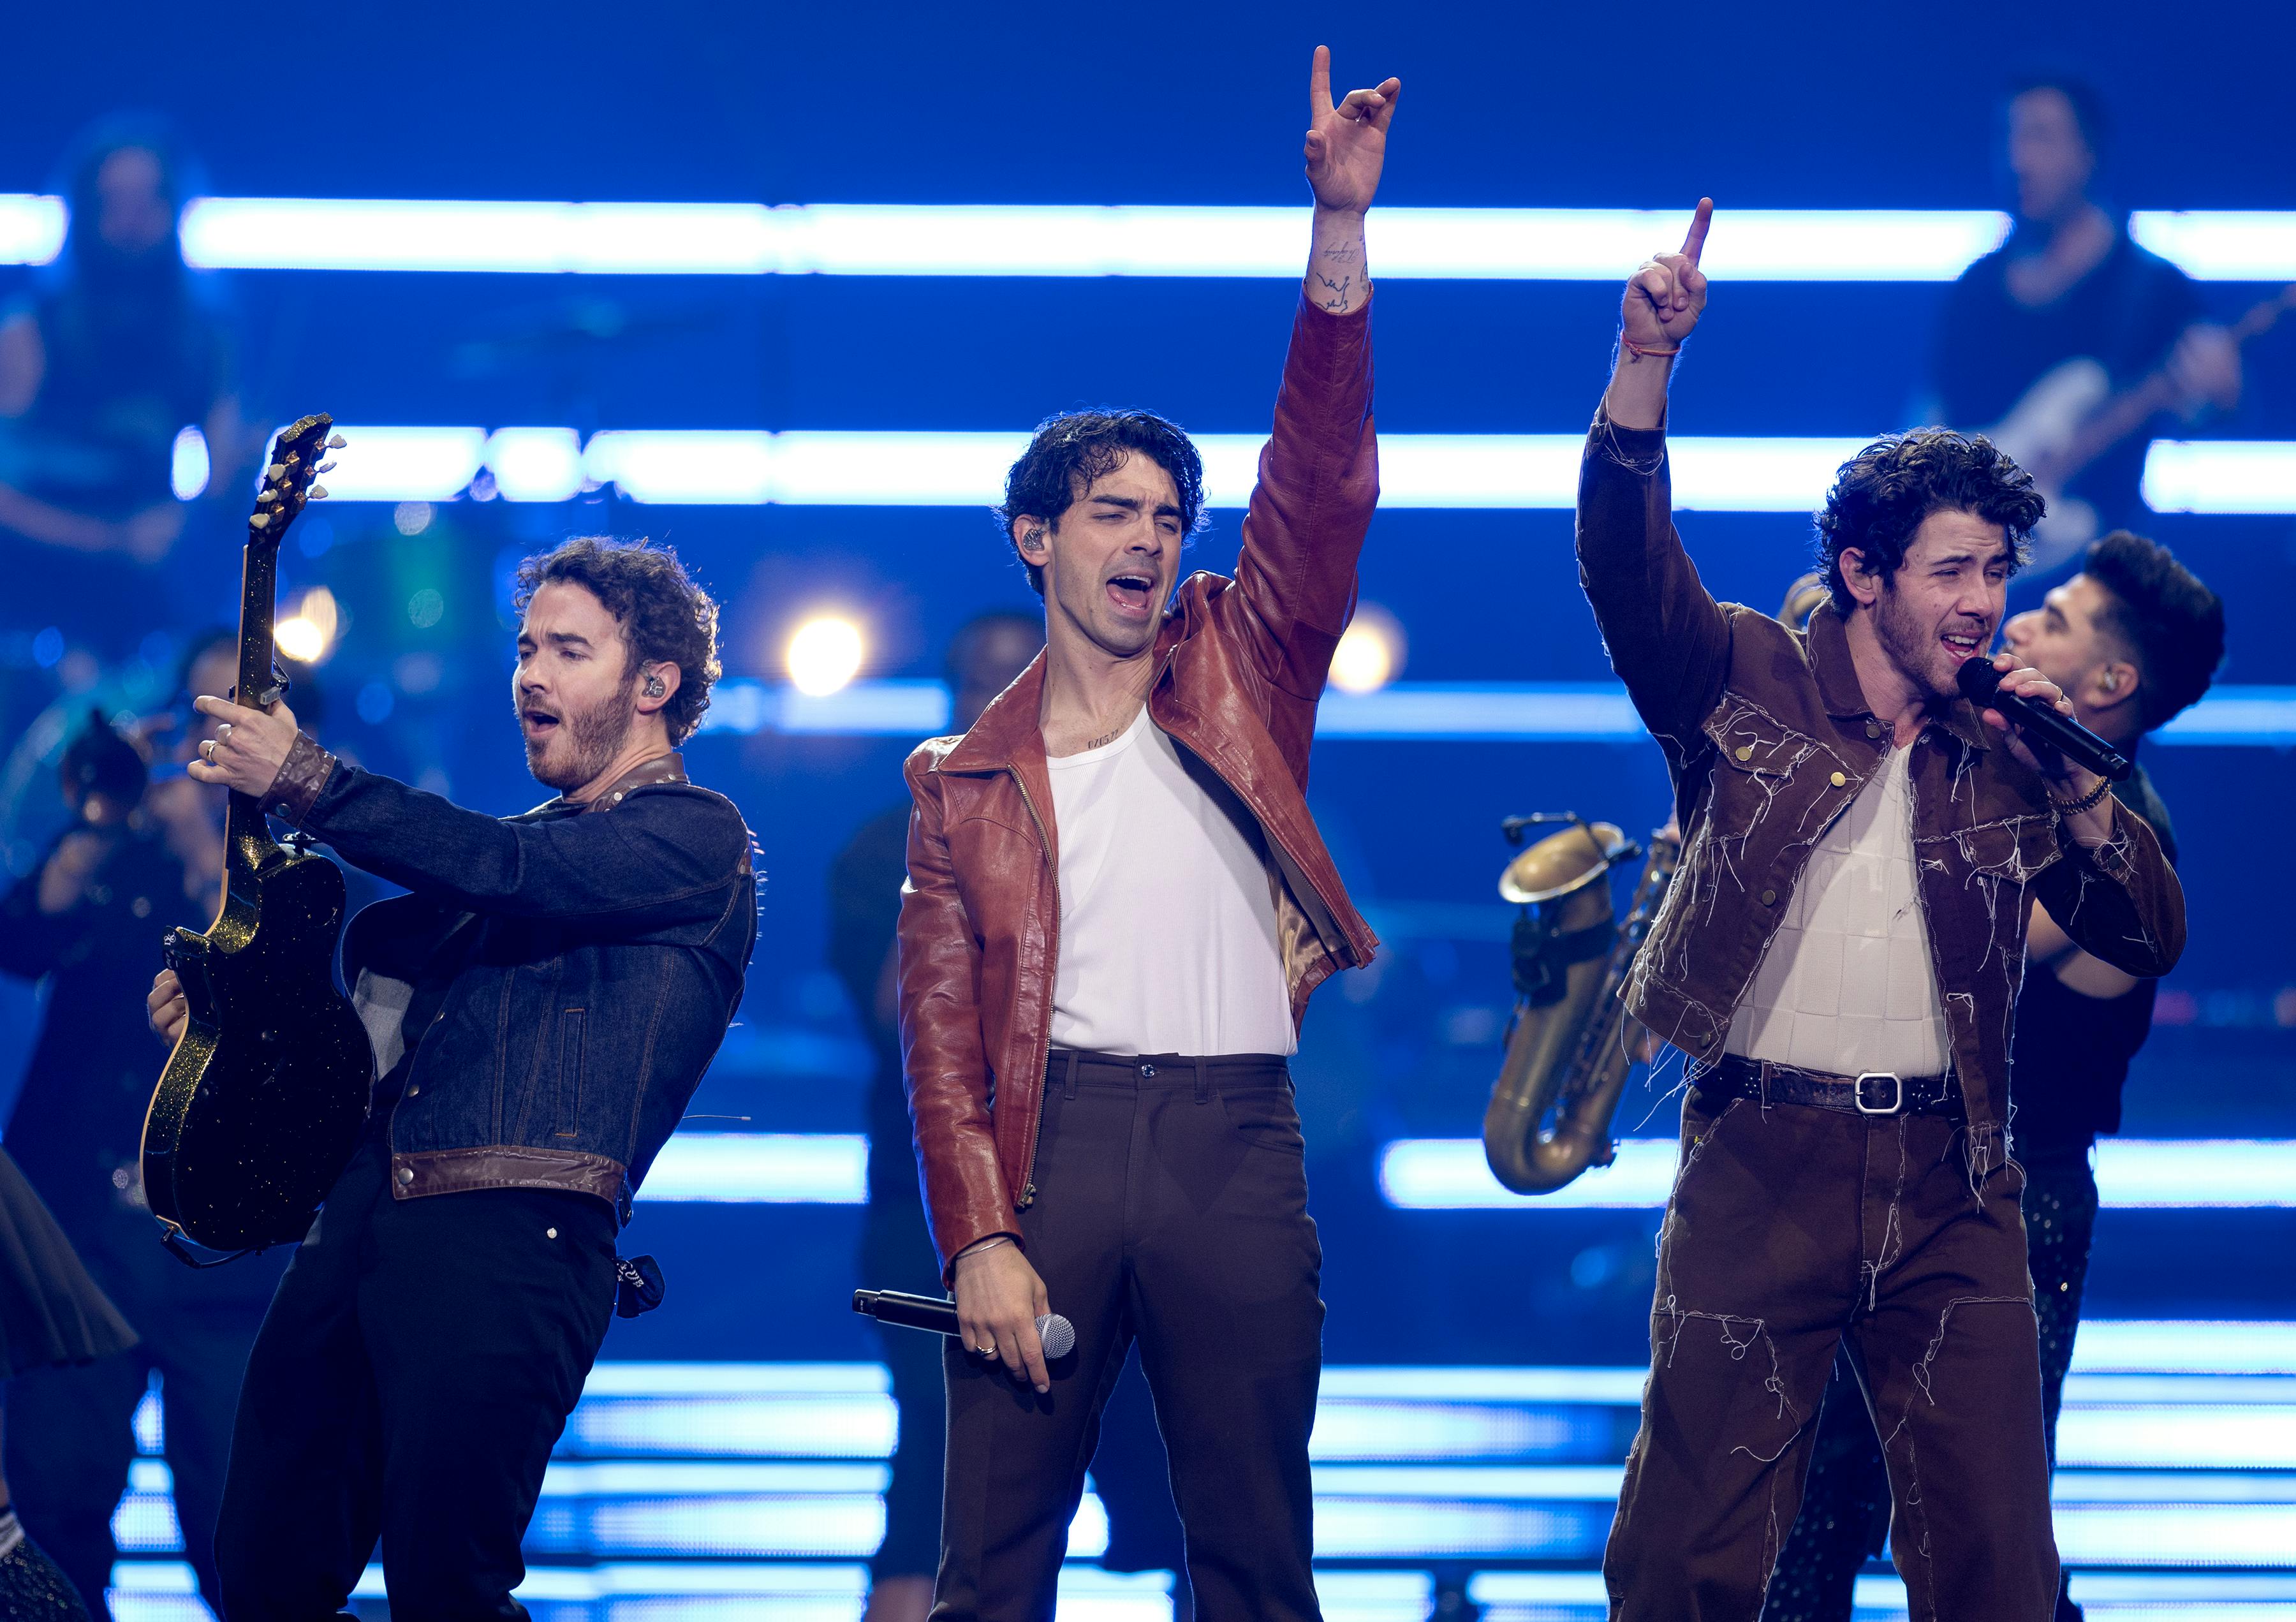 Review: Was it too much or too little of the Jonas Brothers in St. Paul?